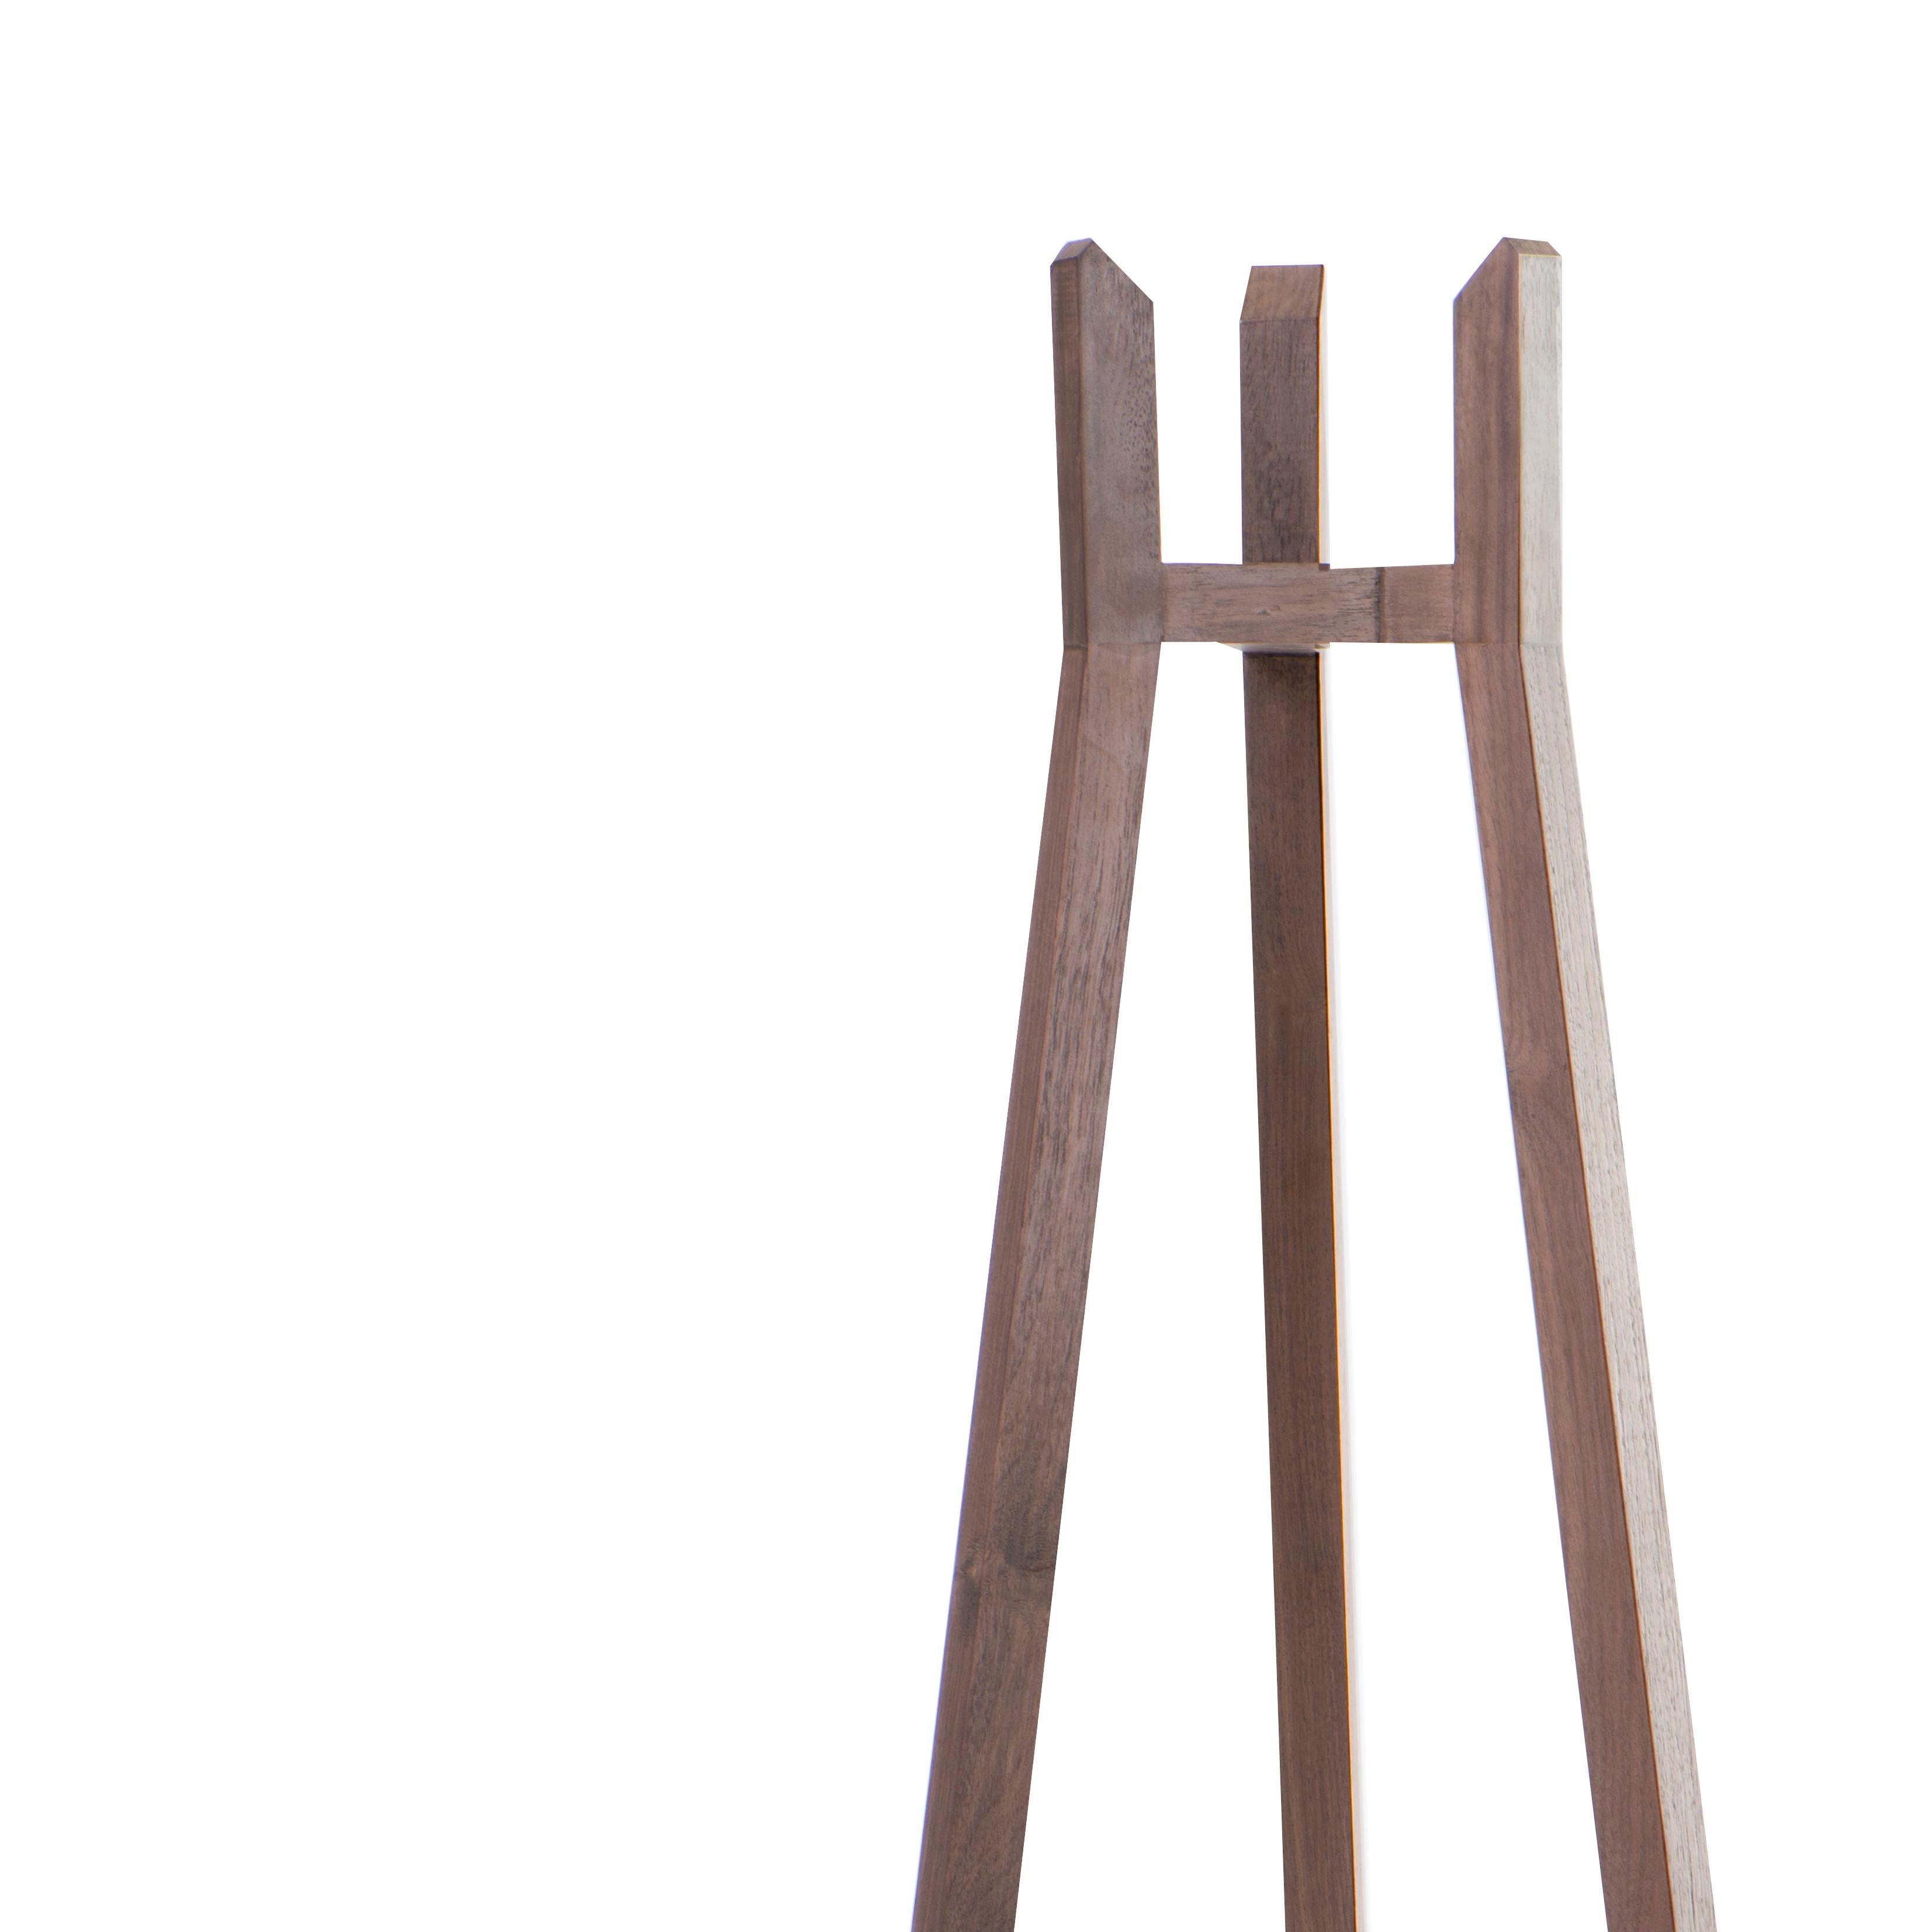 The simplicity and set of angles of the collection merge into the coat stand. Designed with thin lines, but with great strength and stability. Produced in three different types of wood: tzalam, walnut and oak.